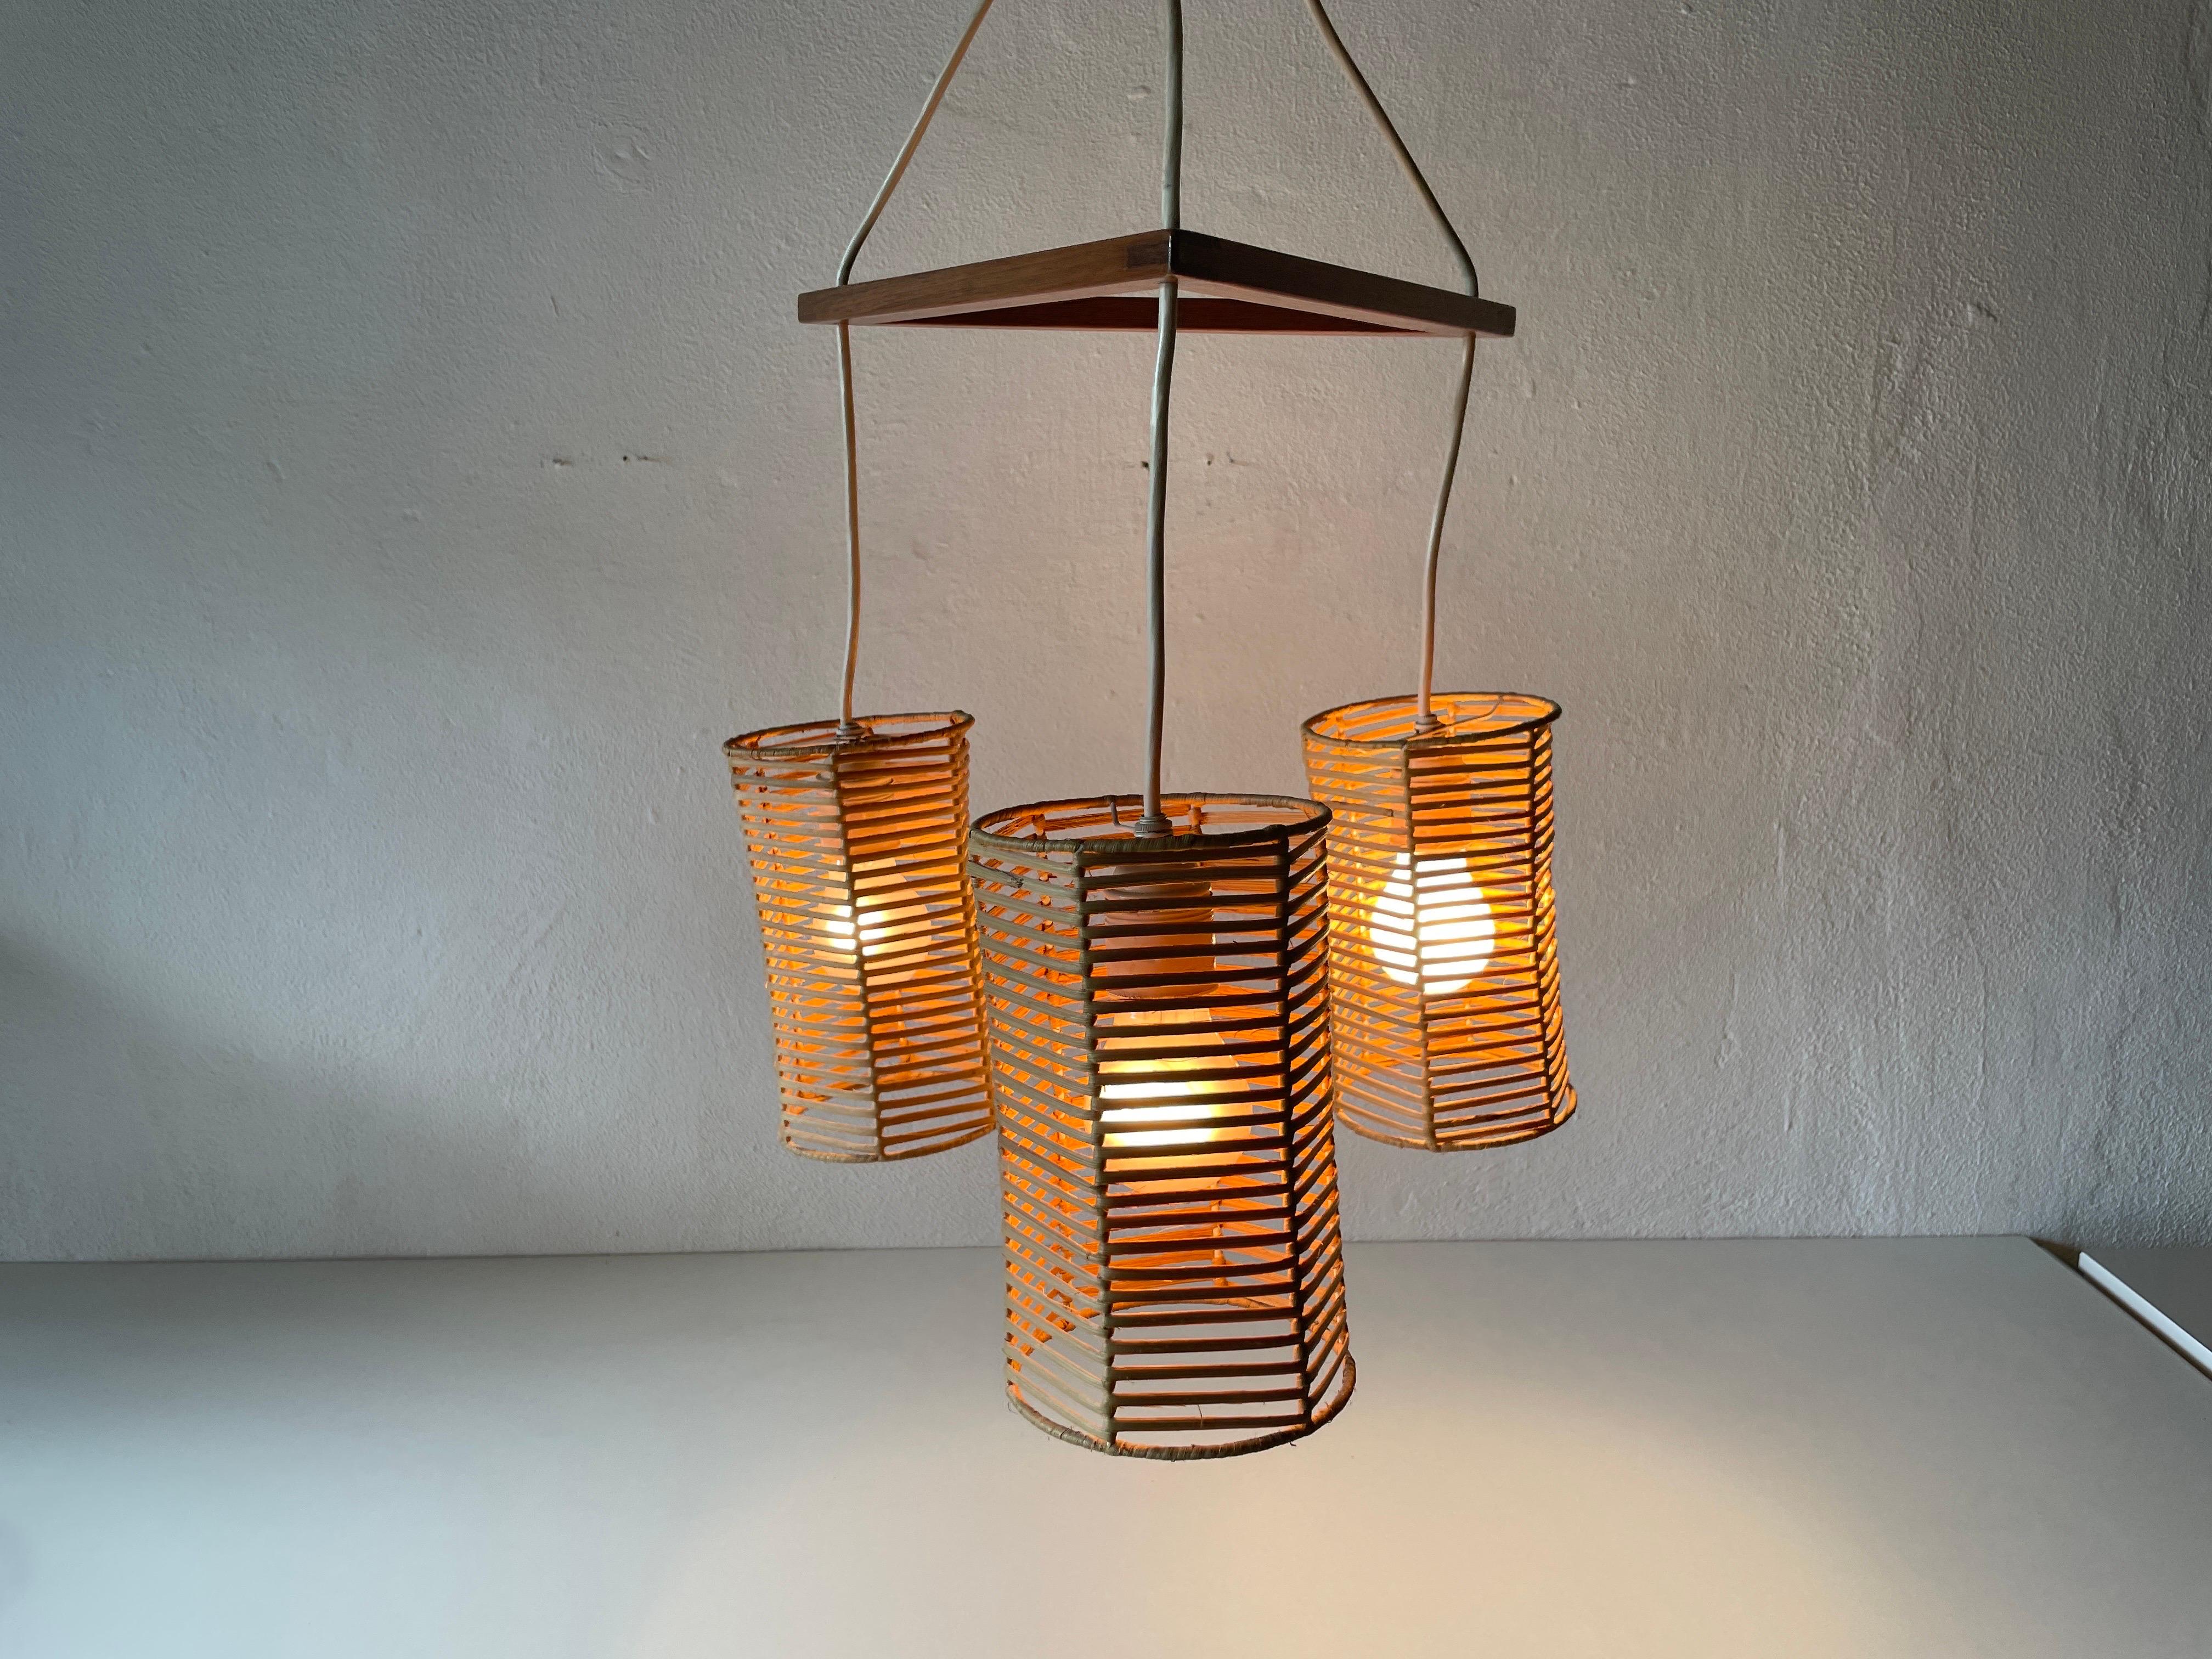 Triple Shade Wicker and Wood Pendant Lamp, 1960s, Germany For Sale 13